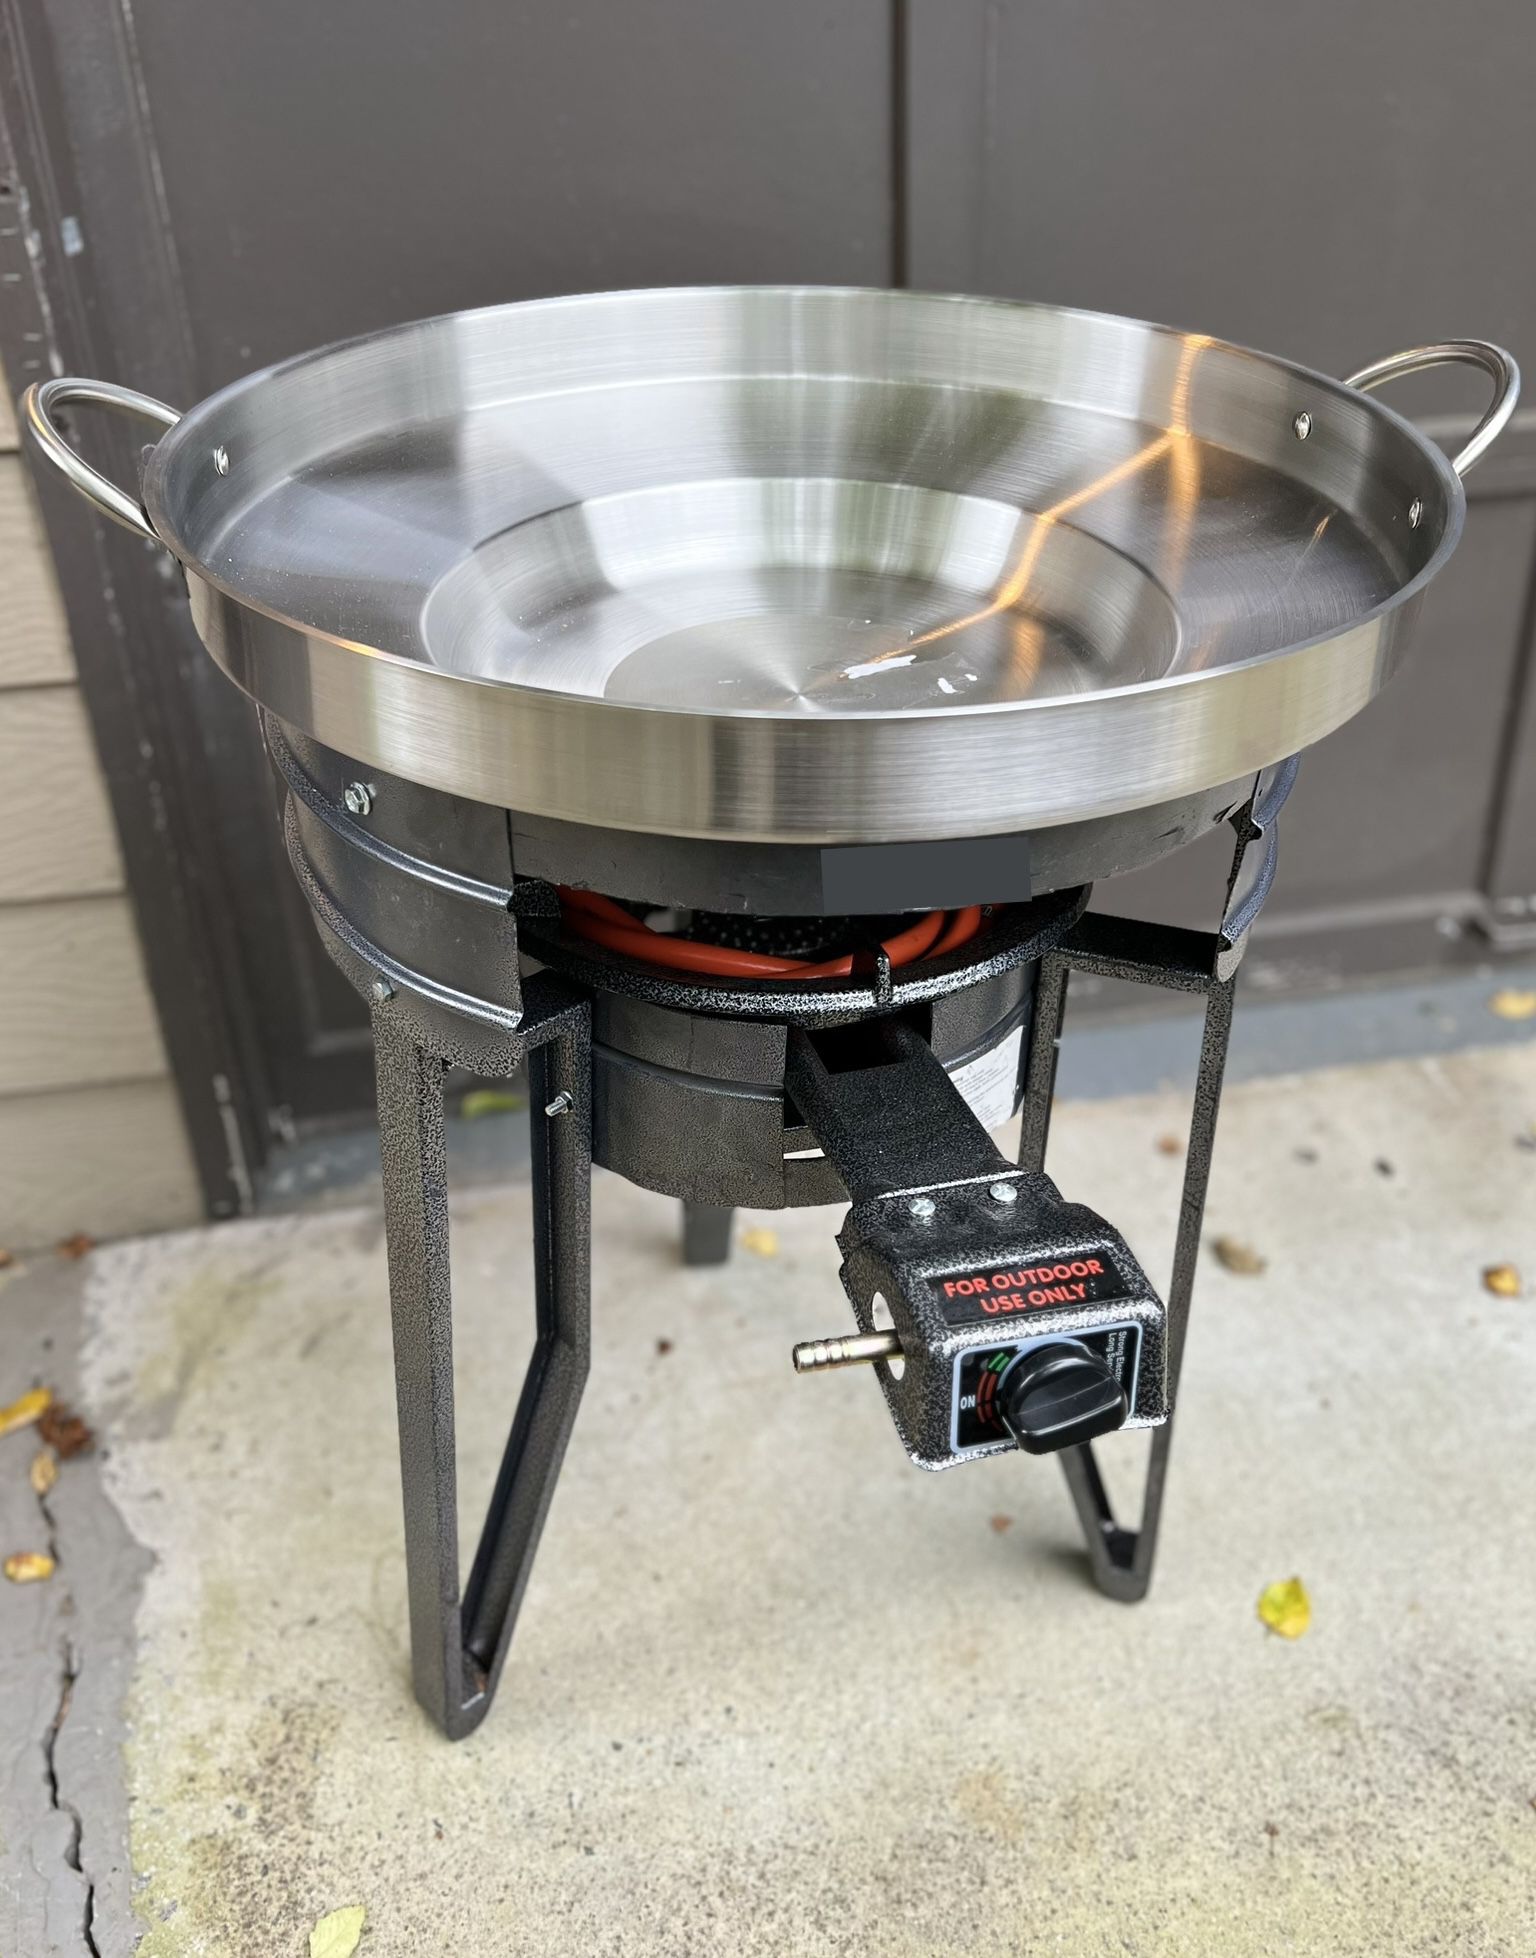 Concave Comal Set, Stainless Steel Comal with Propane Burner